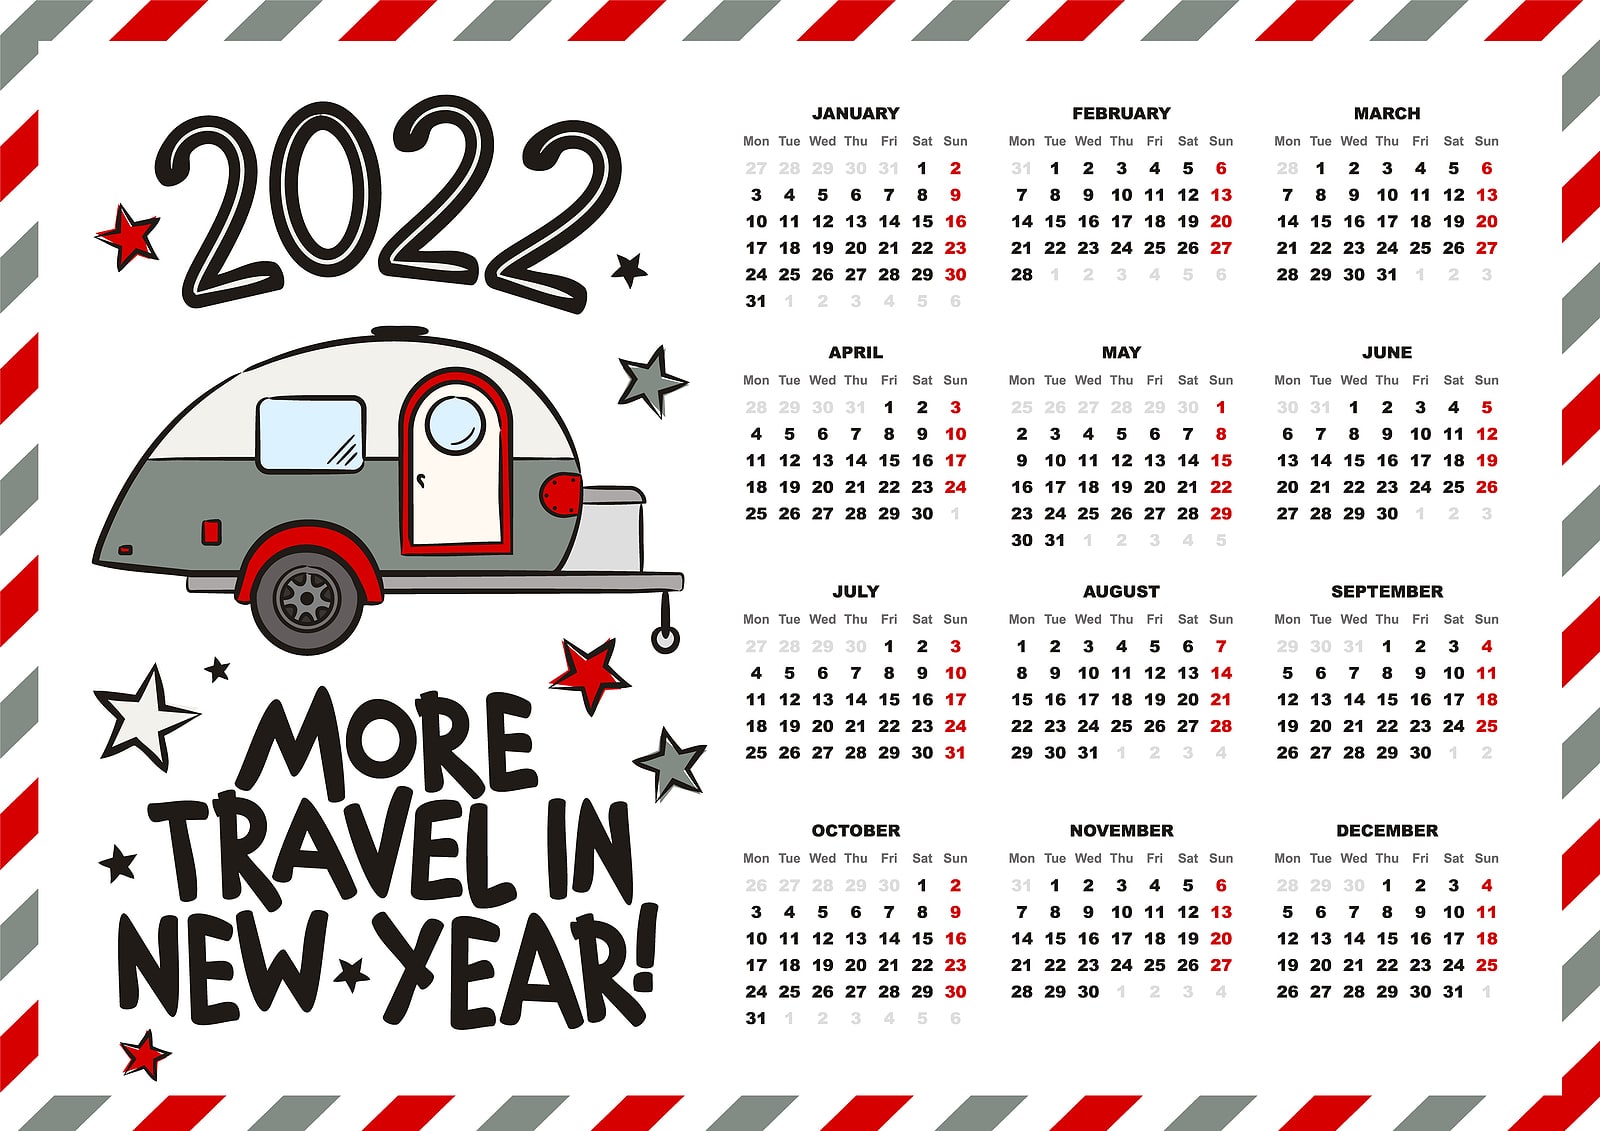 Why Your New Year’s Resolution Includes More Travel